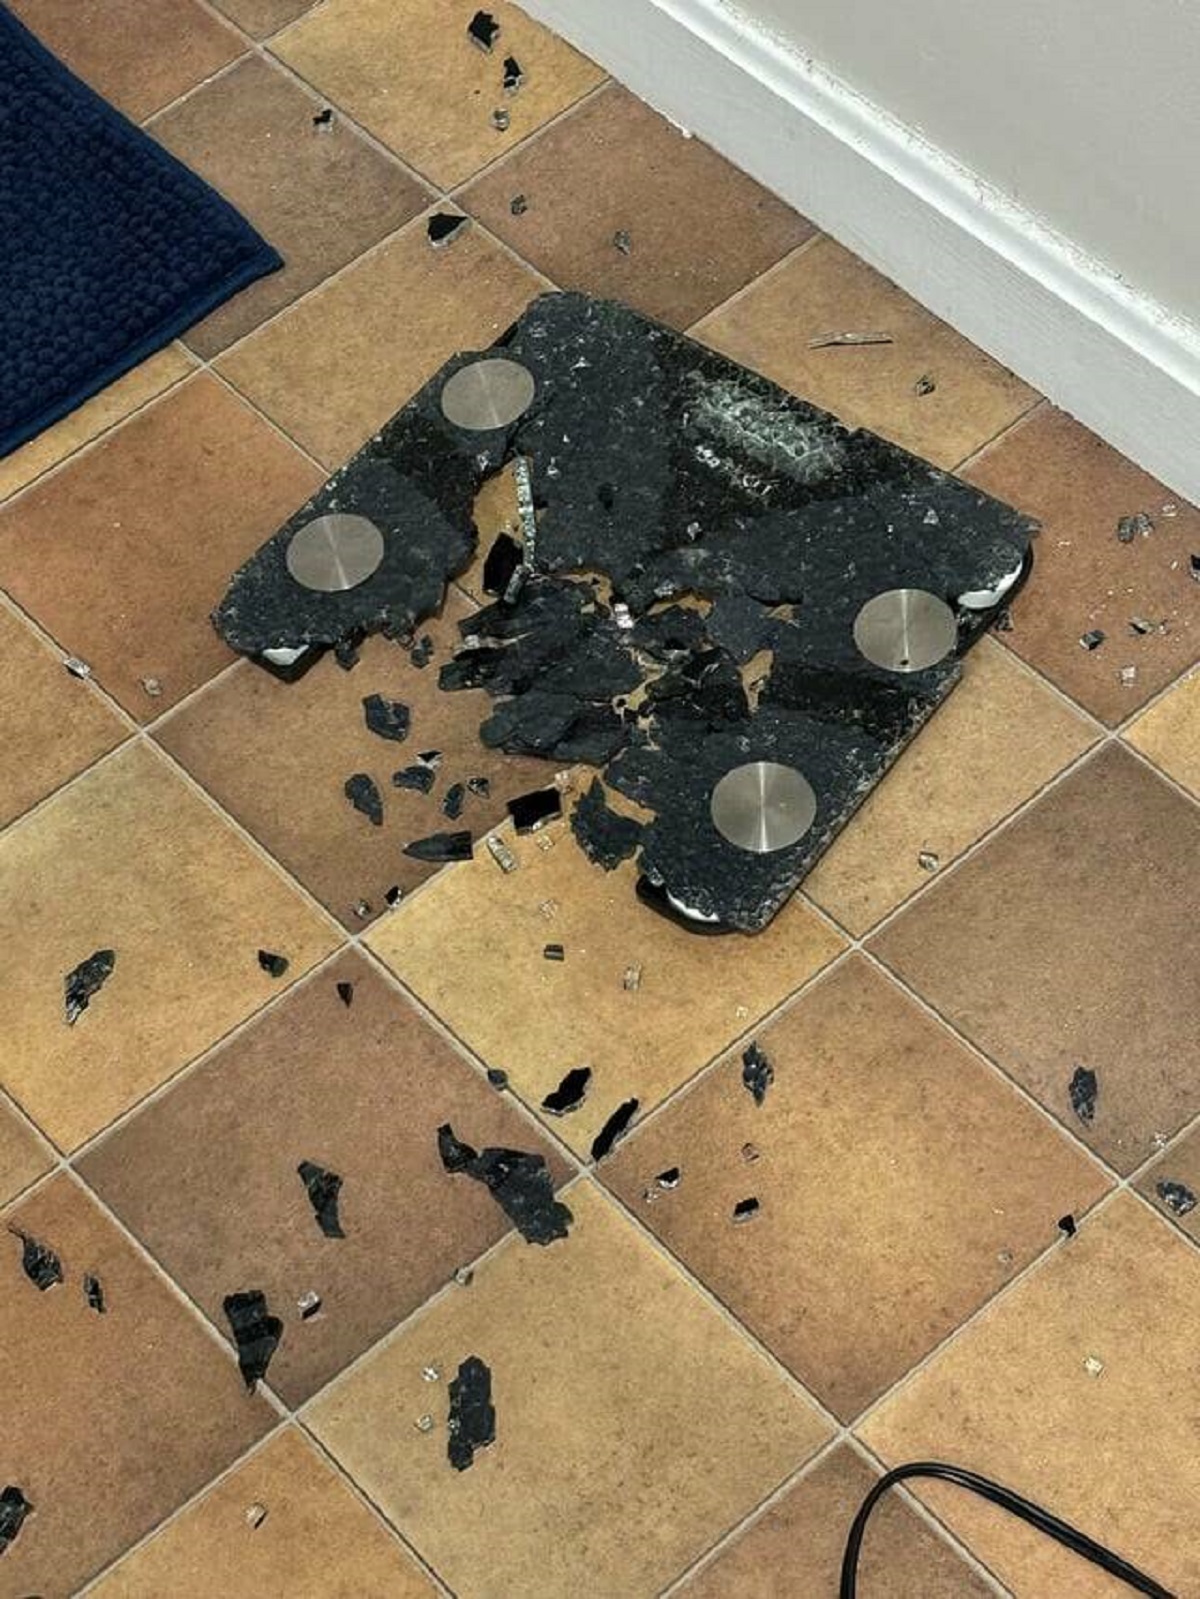 "My bathroom scale randomly shattered. No sound, nothing around it that could’ve hit it."